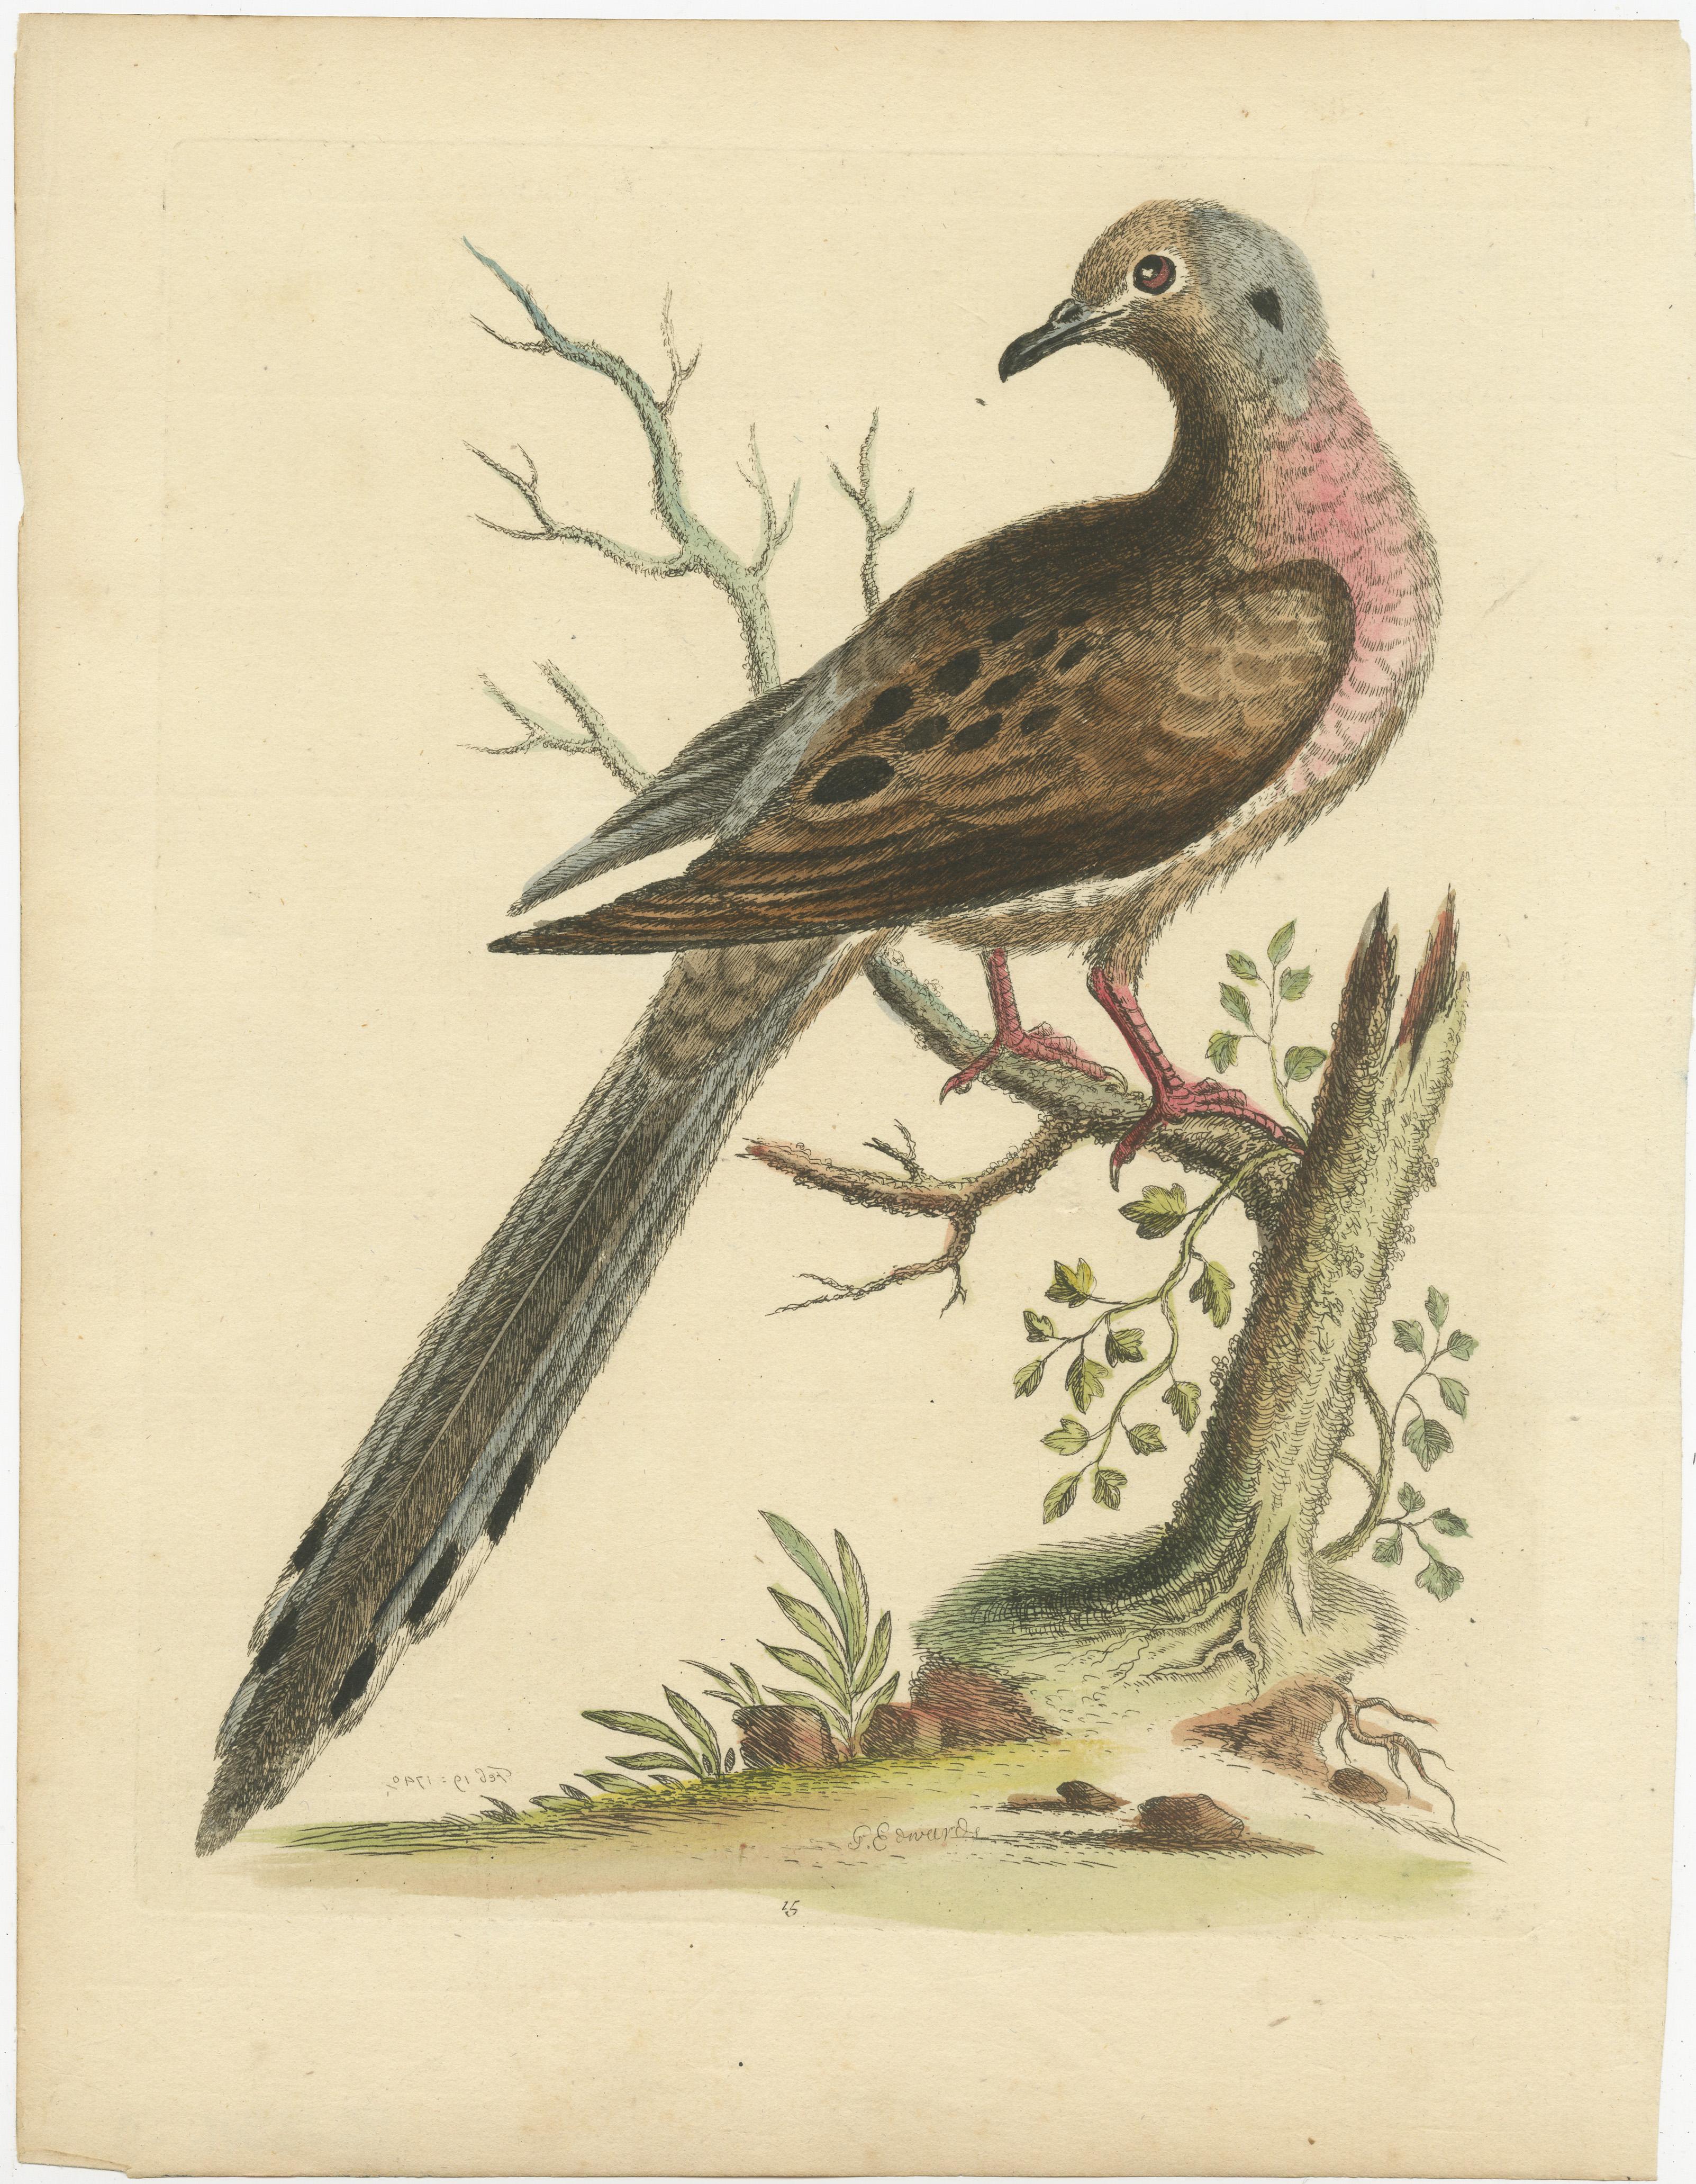 Original antique bird print of, most likely, a passenger pigeon or wild pigeon (Ectopistes migratorius). This print originates from 'Natural History of Uncommon Birds' by George Edwards. Published 1743-51. 

George Edwards FRS (3 April 1694 – 23